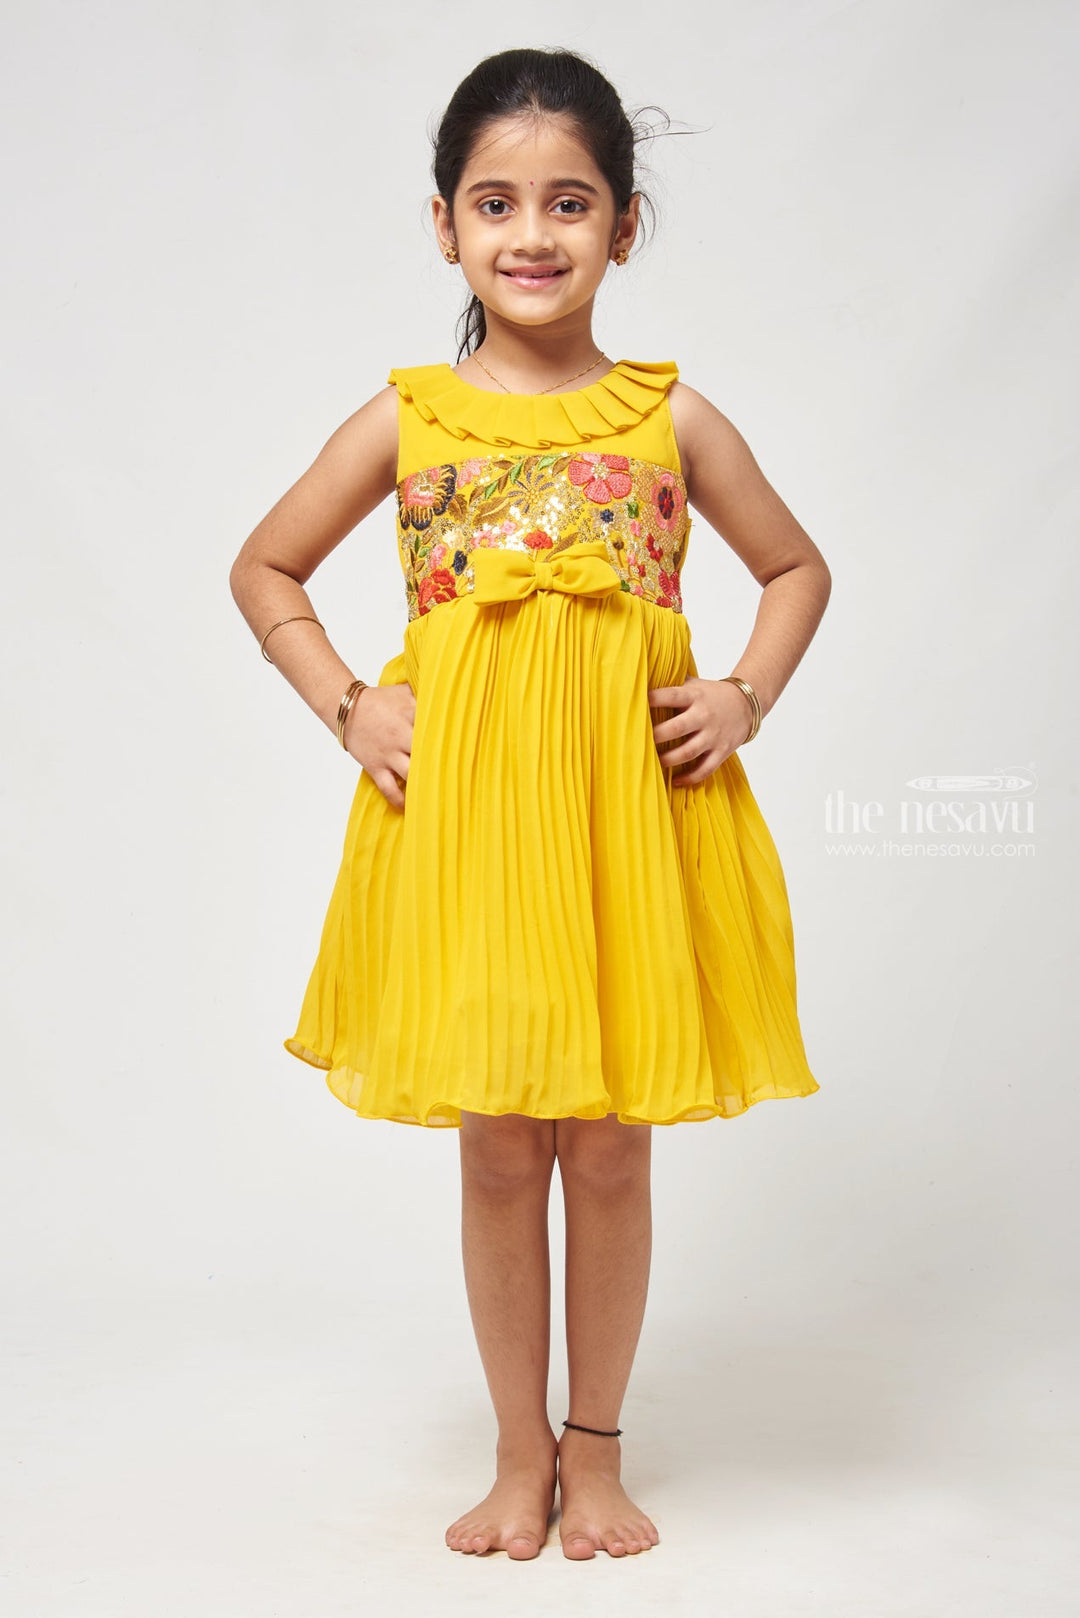 The Nesavu Girls Fancy Frock Kids Fancy Georgette Gown Ankle-Length with Halter Neck Design Nesavu 16 (1Y) / Yellow / Georgette GFC1123A-16 Tiered Party Dress For Girls - Stylish Choice For Casual Outings | The Nesavu